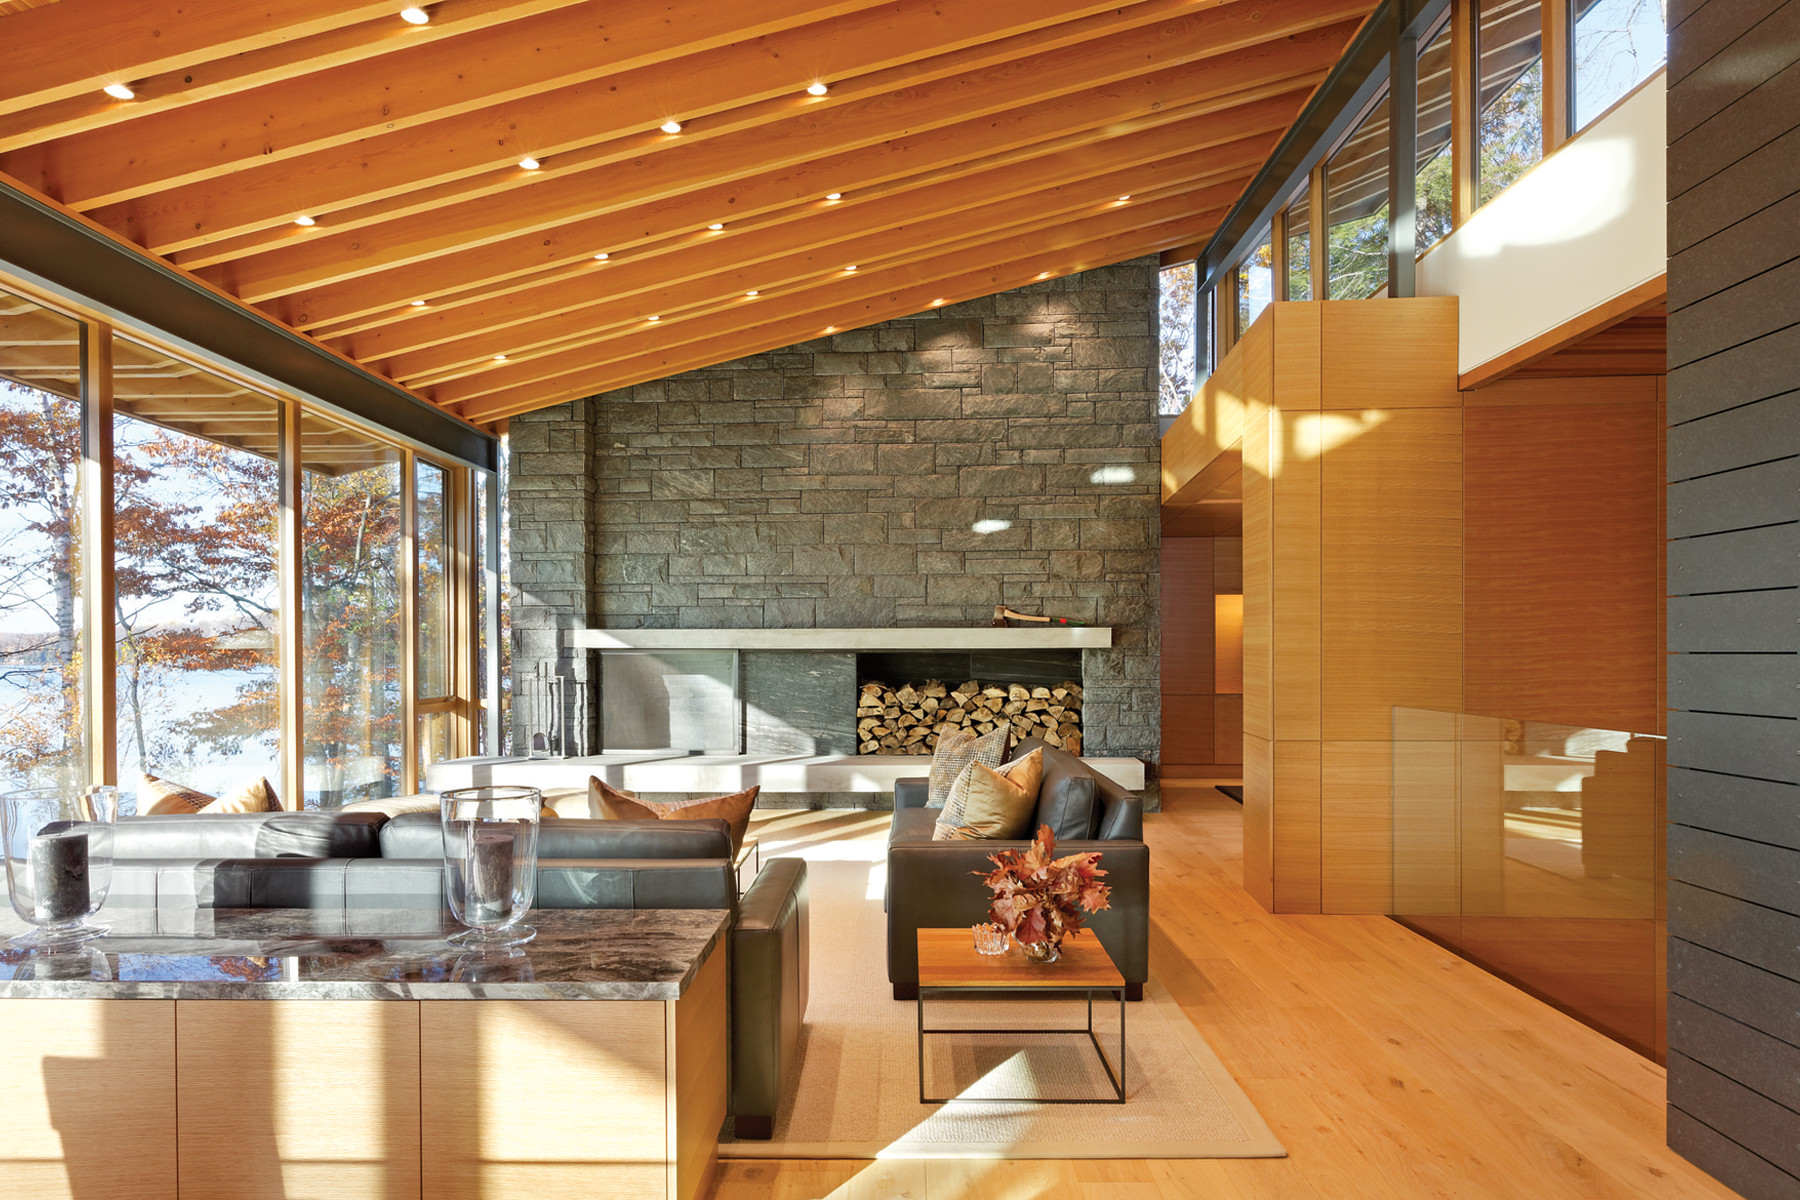 Living room with fireplace, slanted rafter ceiling with clerestory windows on the right and glazed wall on the left with views of lake and trees